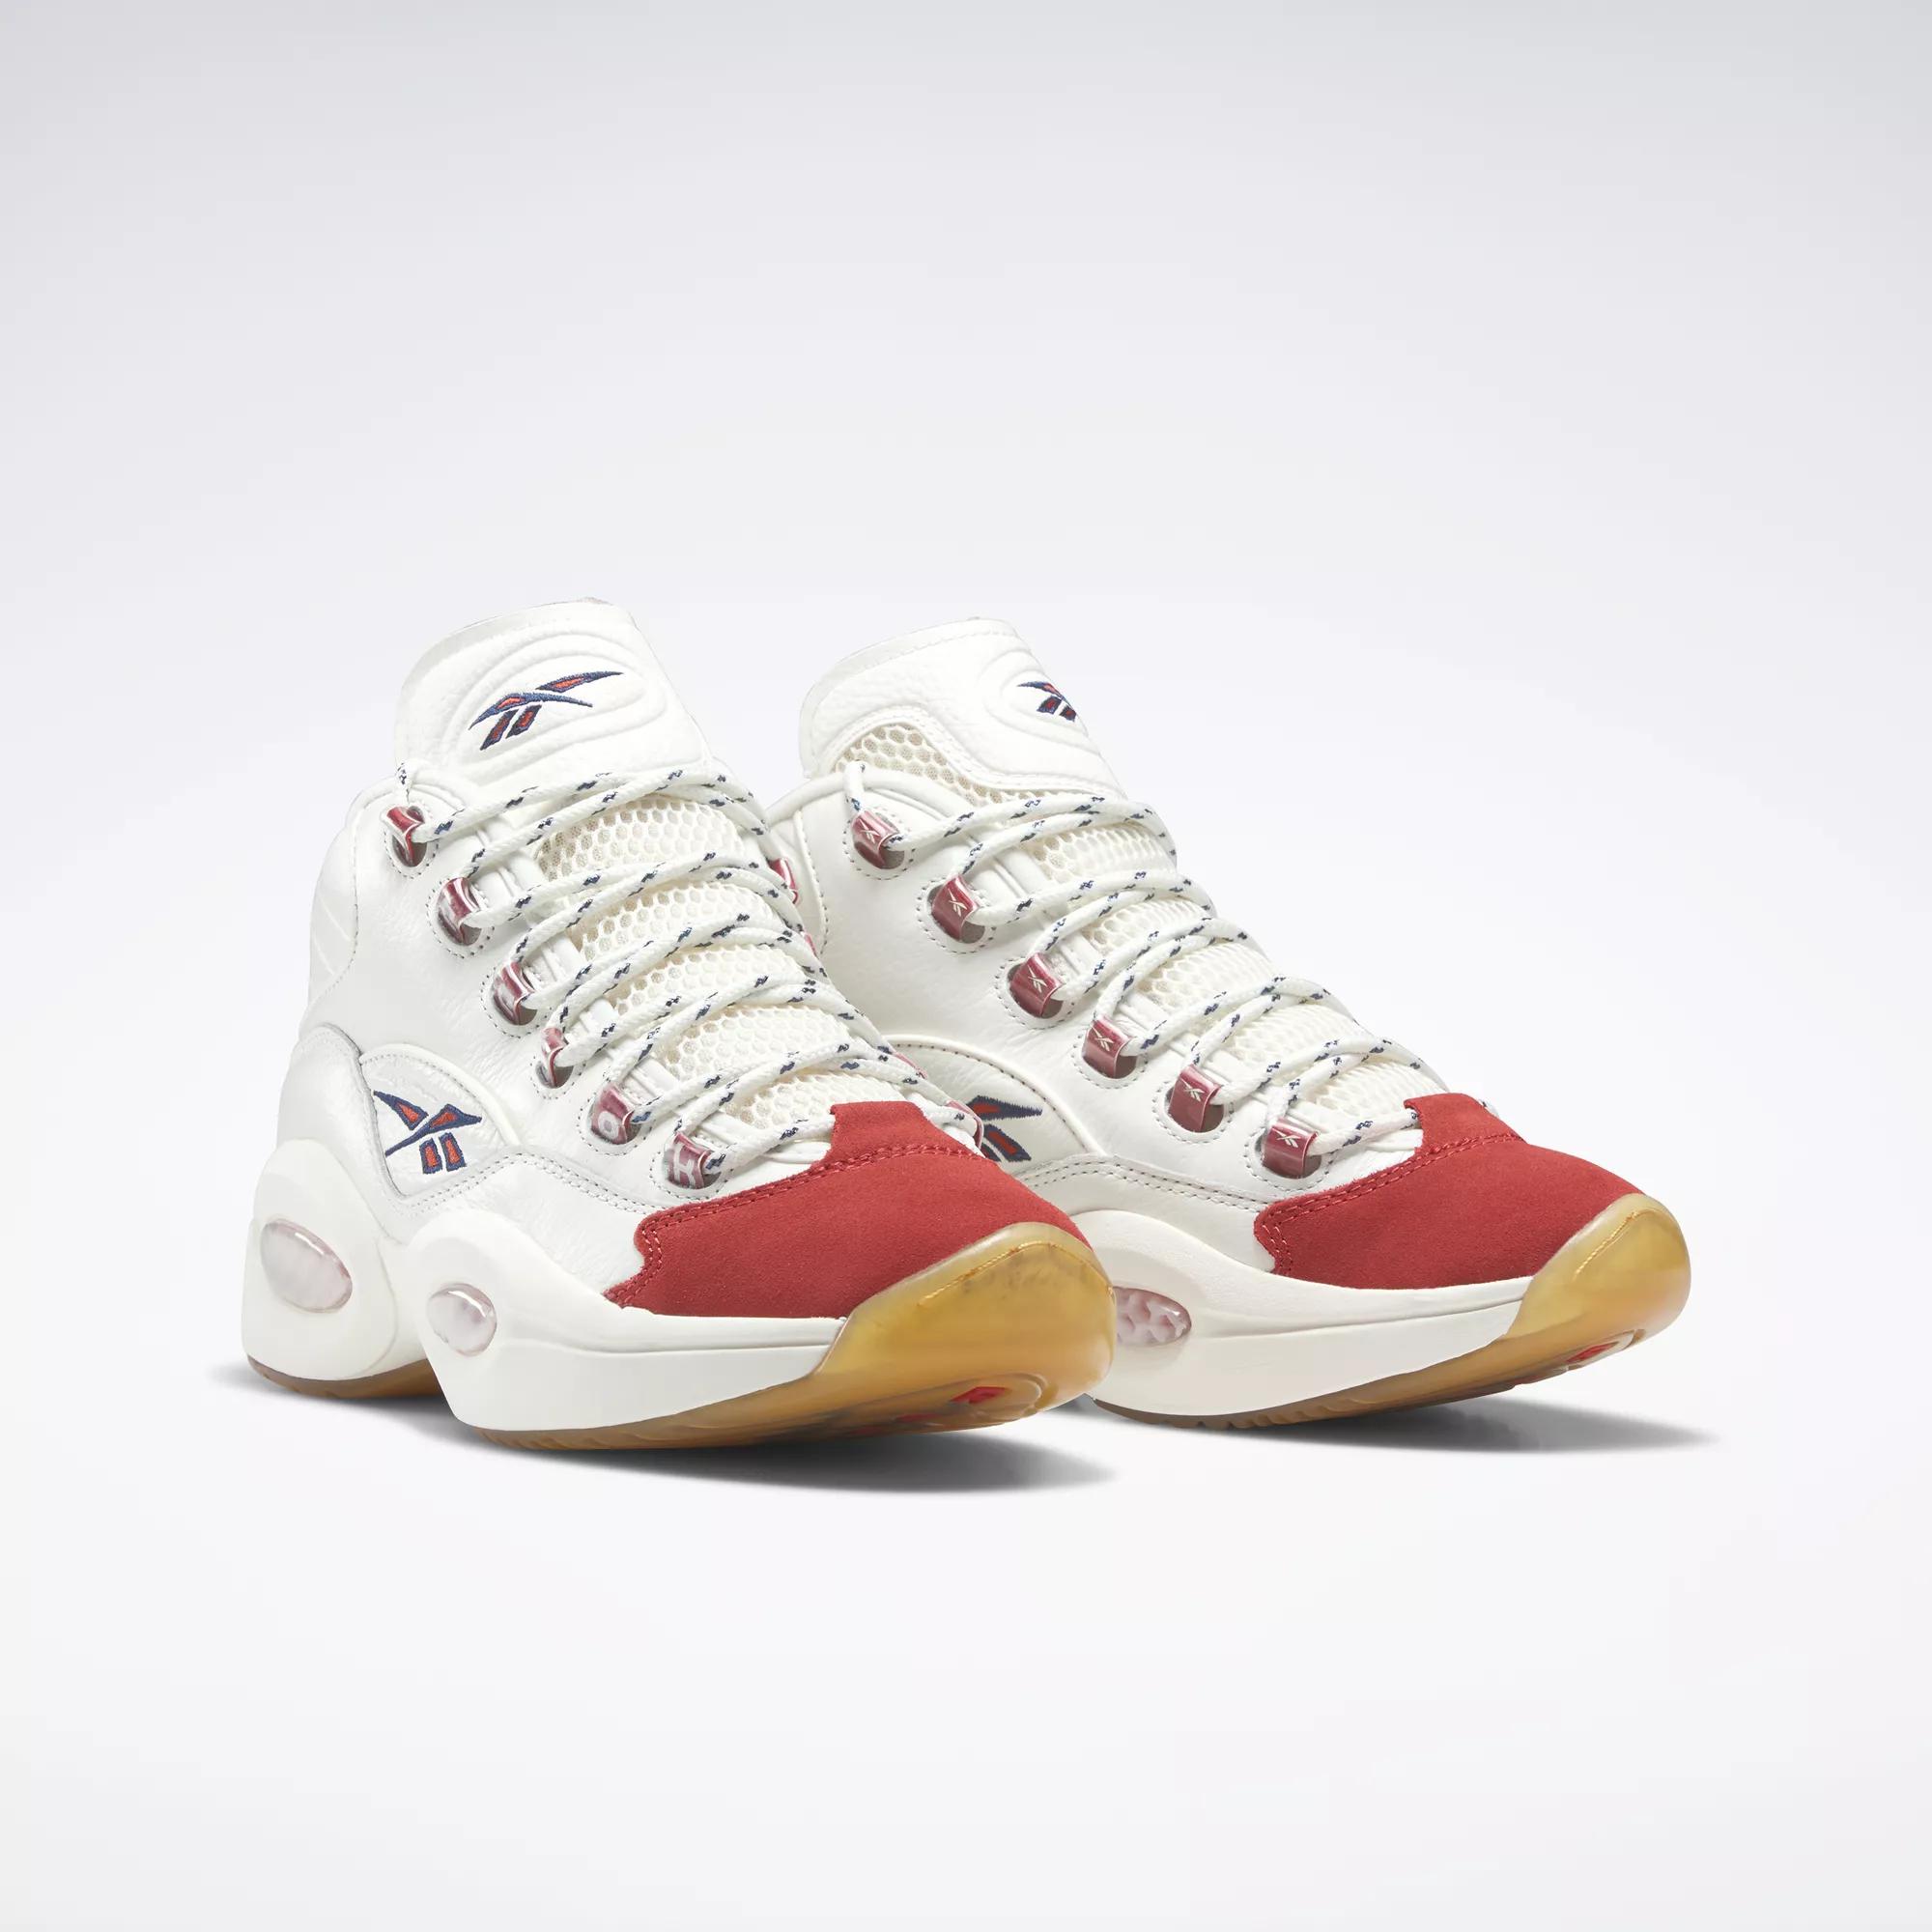 Reebok Question Mid Dress Code Review 